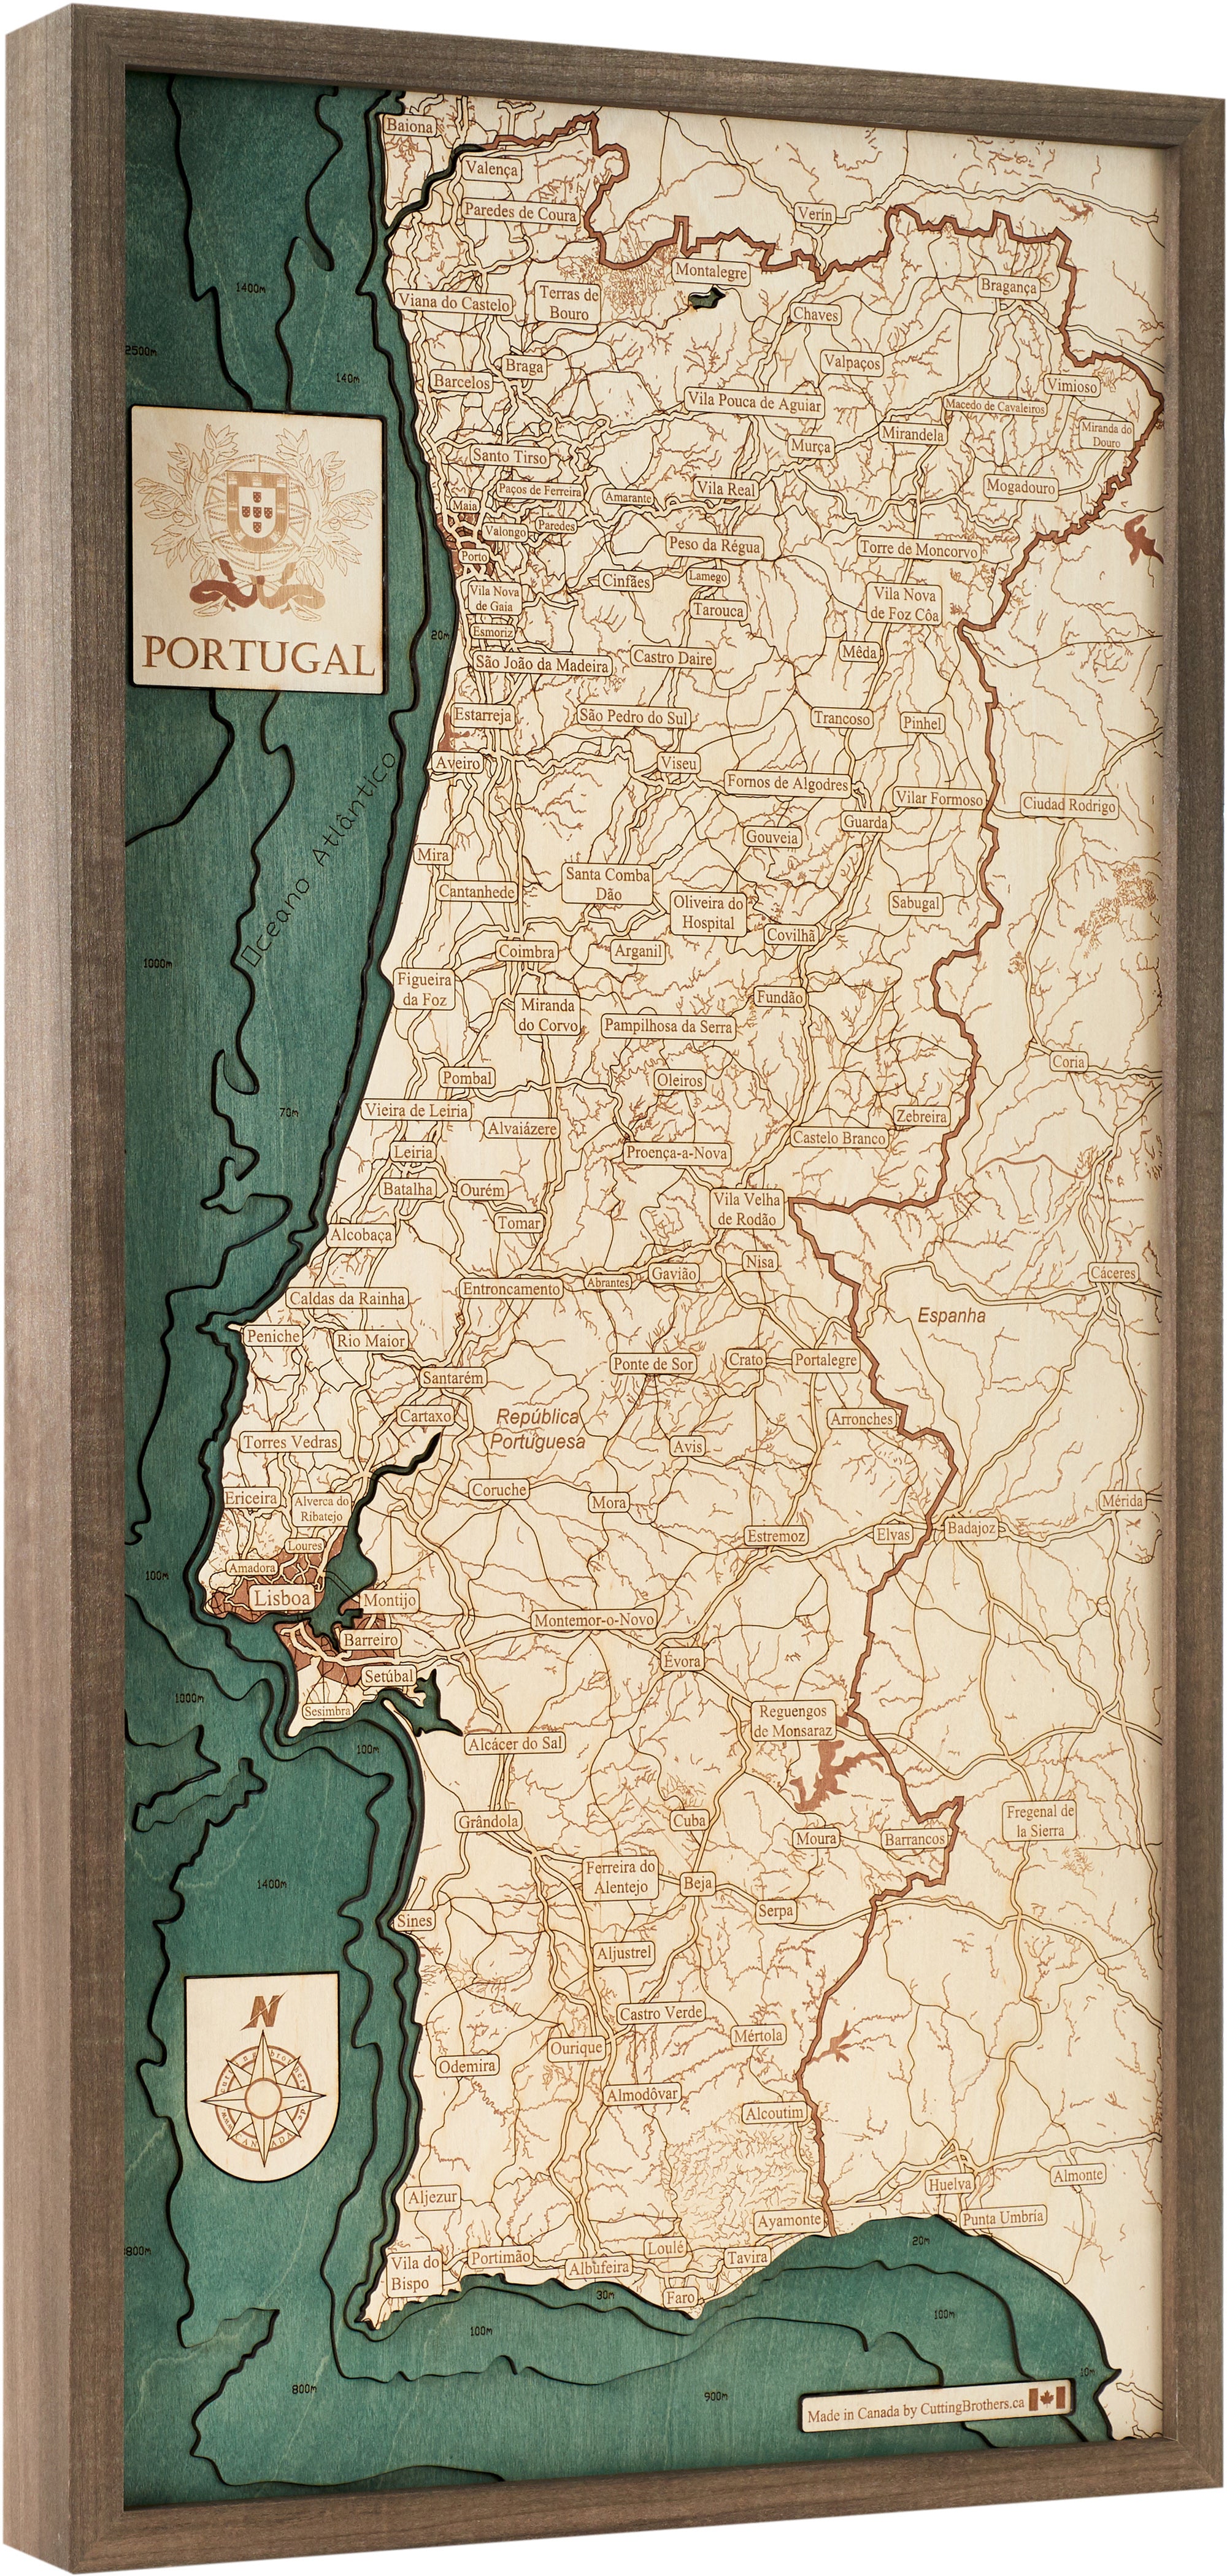 PORTUGAL 3D Wooden Wall Map - Version M